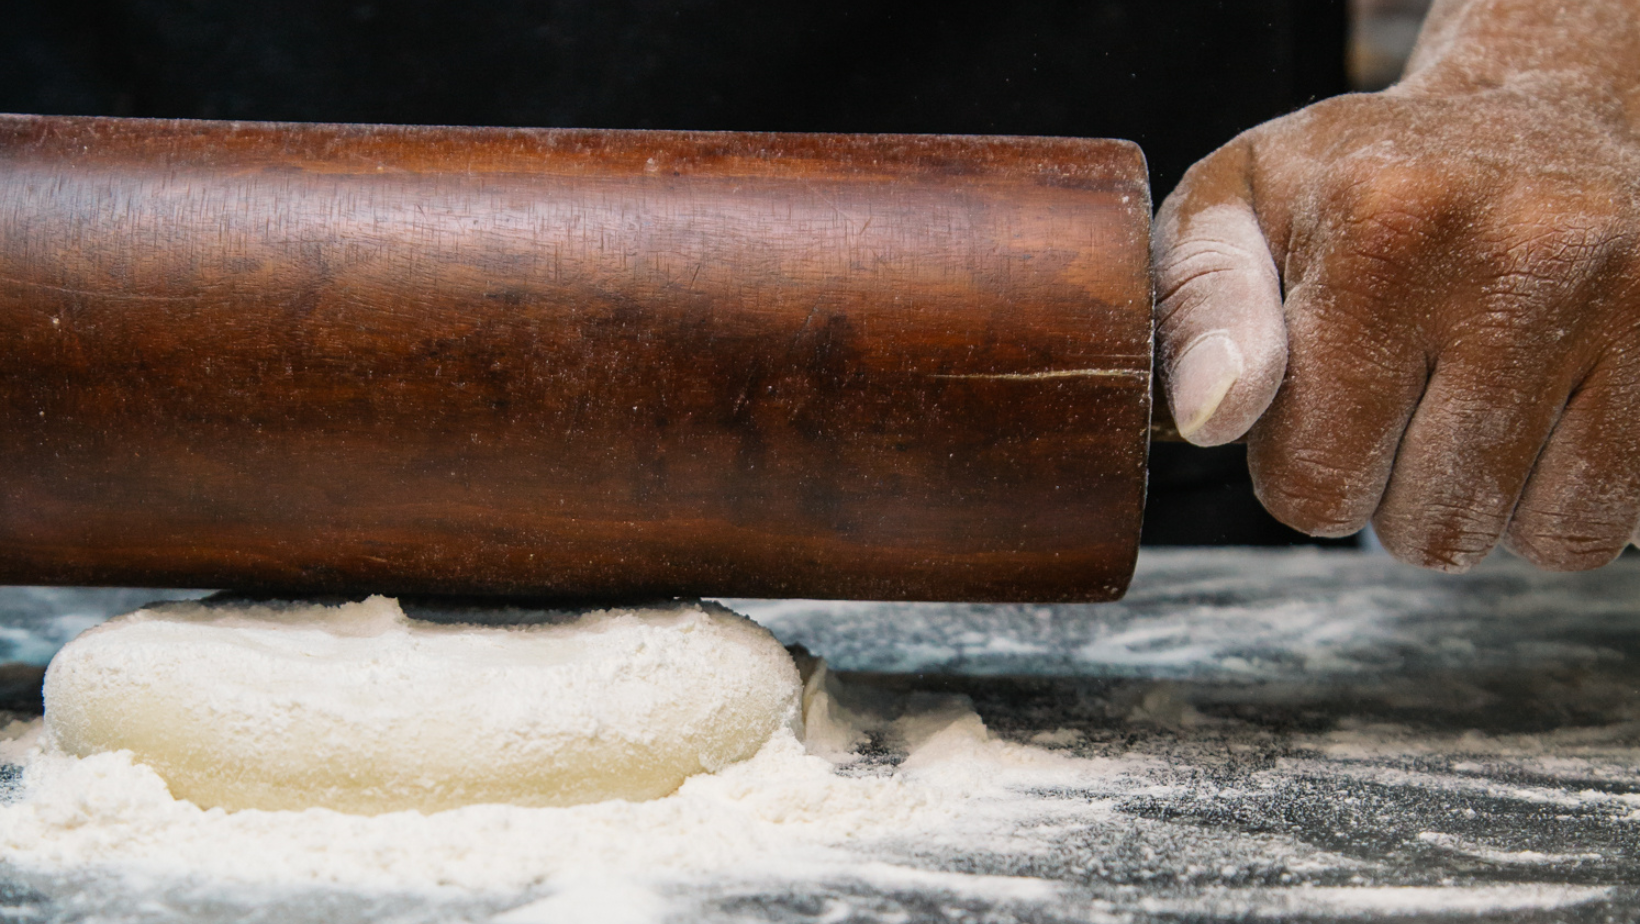 Rolling pin being used to flatten out dough for baking